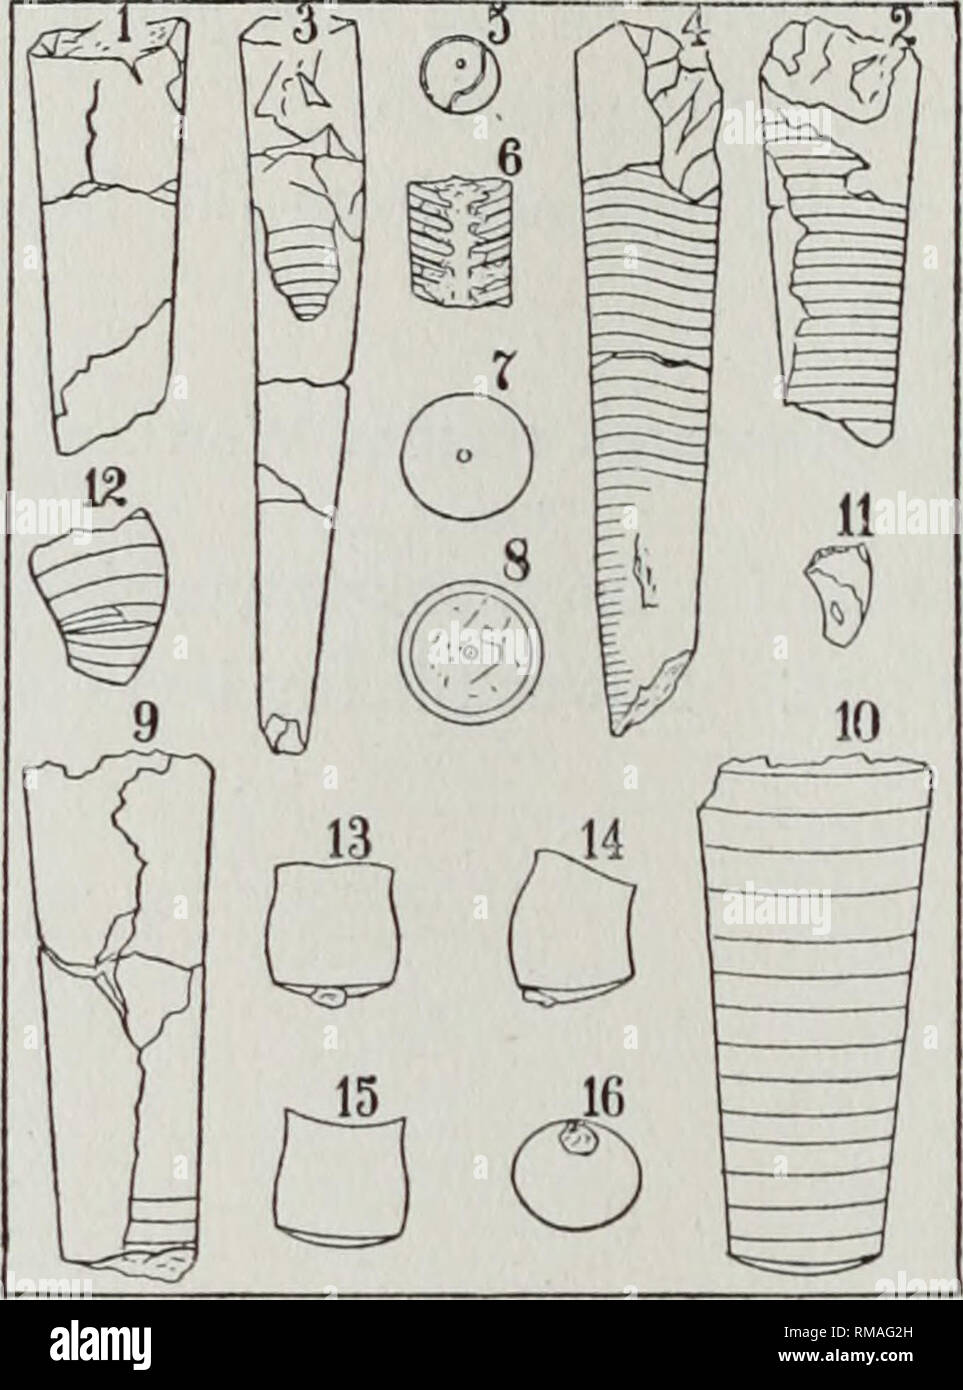 . Annual report. New York State Museum; Science; Science. 168 NEW YORK STATE MUSEUM PLATE 13. Orthoceras trusitum sp. nov. (Si-e plate 10, fig. 25, 26) Page 77 PIC. 1 Fragment preserving the longitudinally lineated surface 2 Internal casts, showing the numerous, shallow camerae and straight transverse suture lines 3 Young individual, showing the slenderness of conch 4 Internal cast, showing undulating septal sutures 5 Septum with excentric siphuncle 6 Broken internal cast, showing the depth of camerae and the tubular siphuncle 7 Septum, showing the circular section of conch and subcentral loca Stock Photo